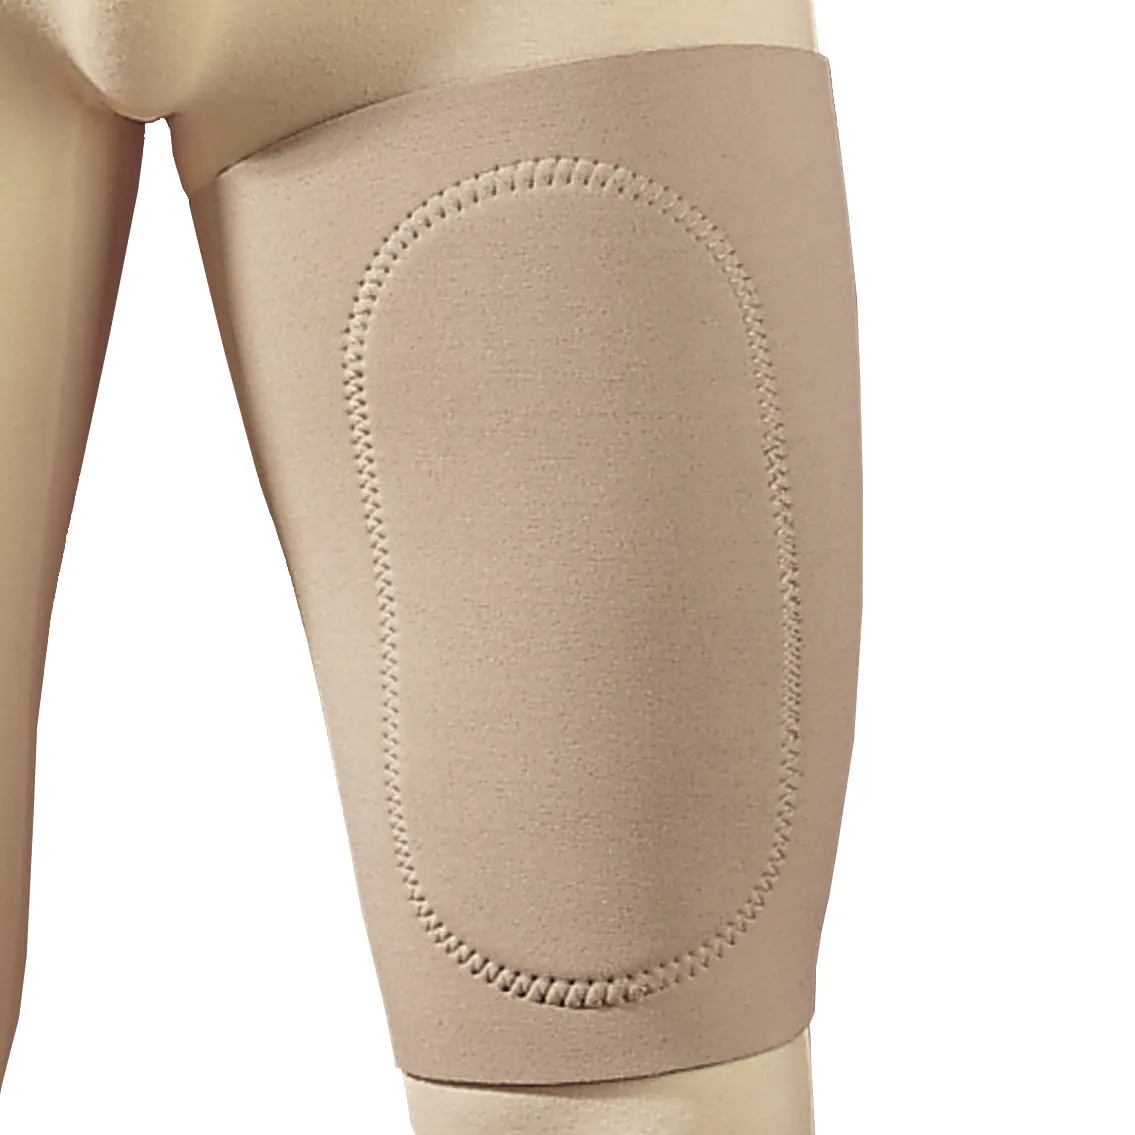 Freeman - From: 612-L To: 612-S - Manufacturing Neoprene Thigh Sleeve